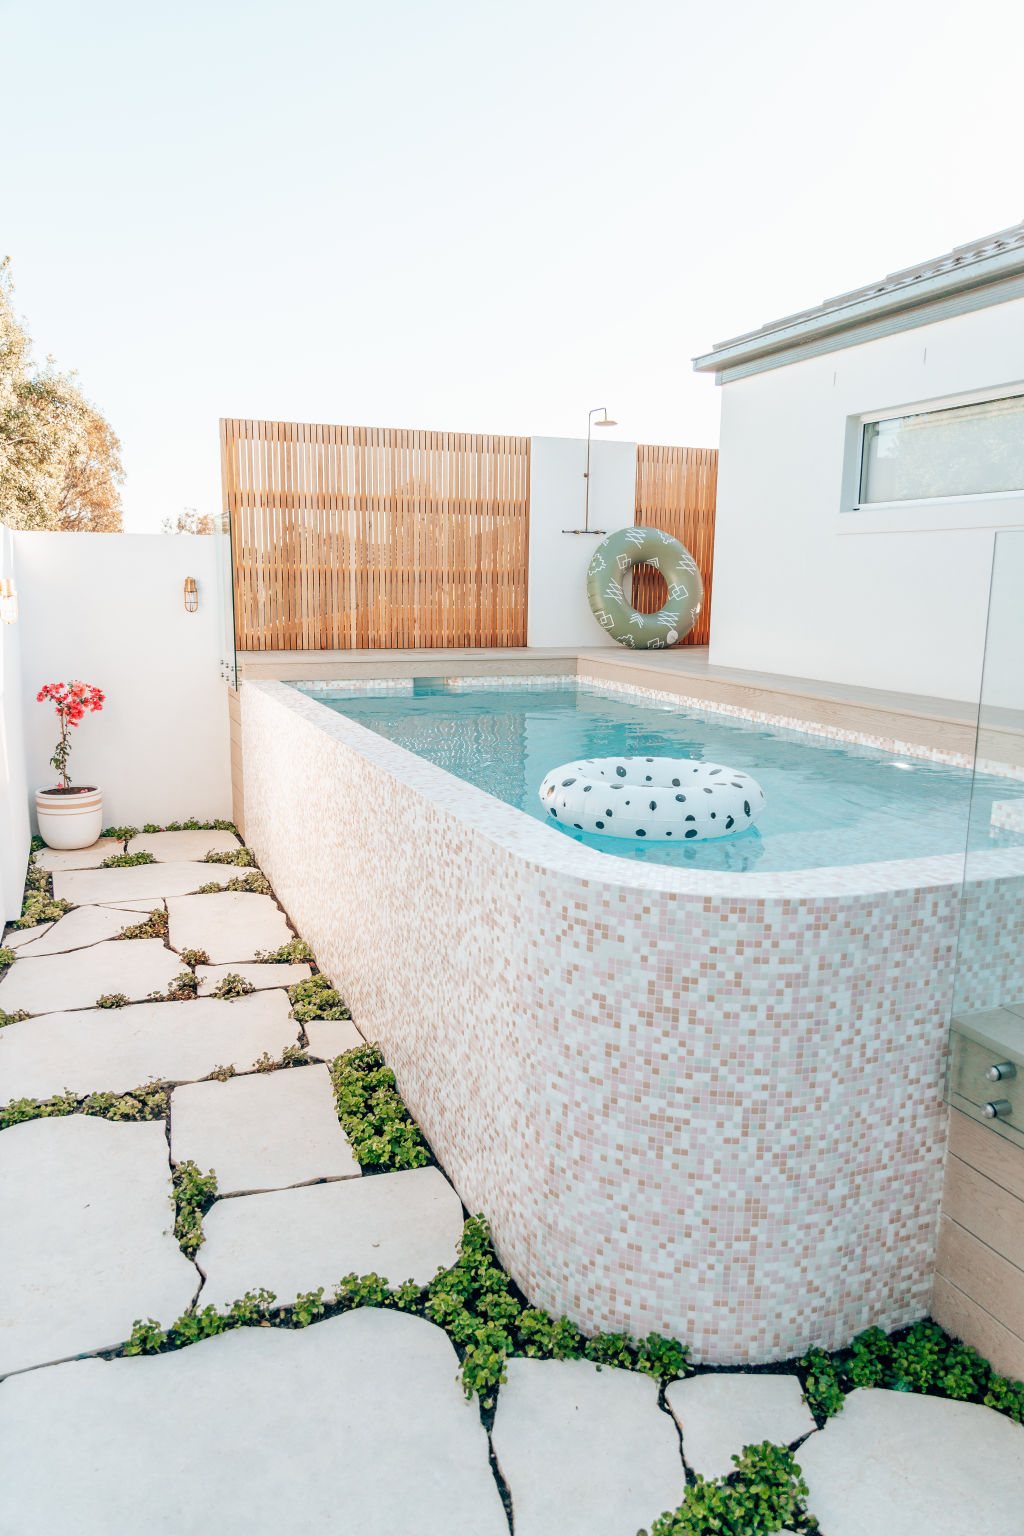 Krystal Dahaby wrapped her above-ground pool in tiny pink mosaic tiles. Photo: Krystal Dahaby